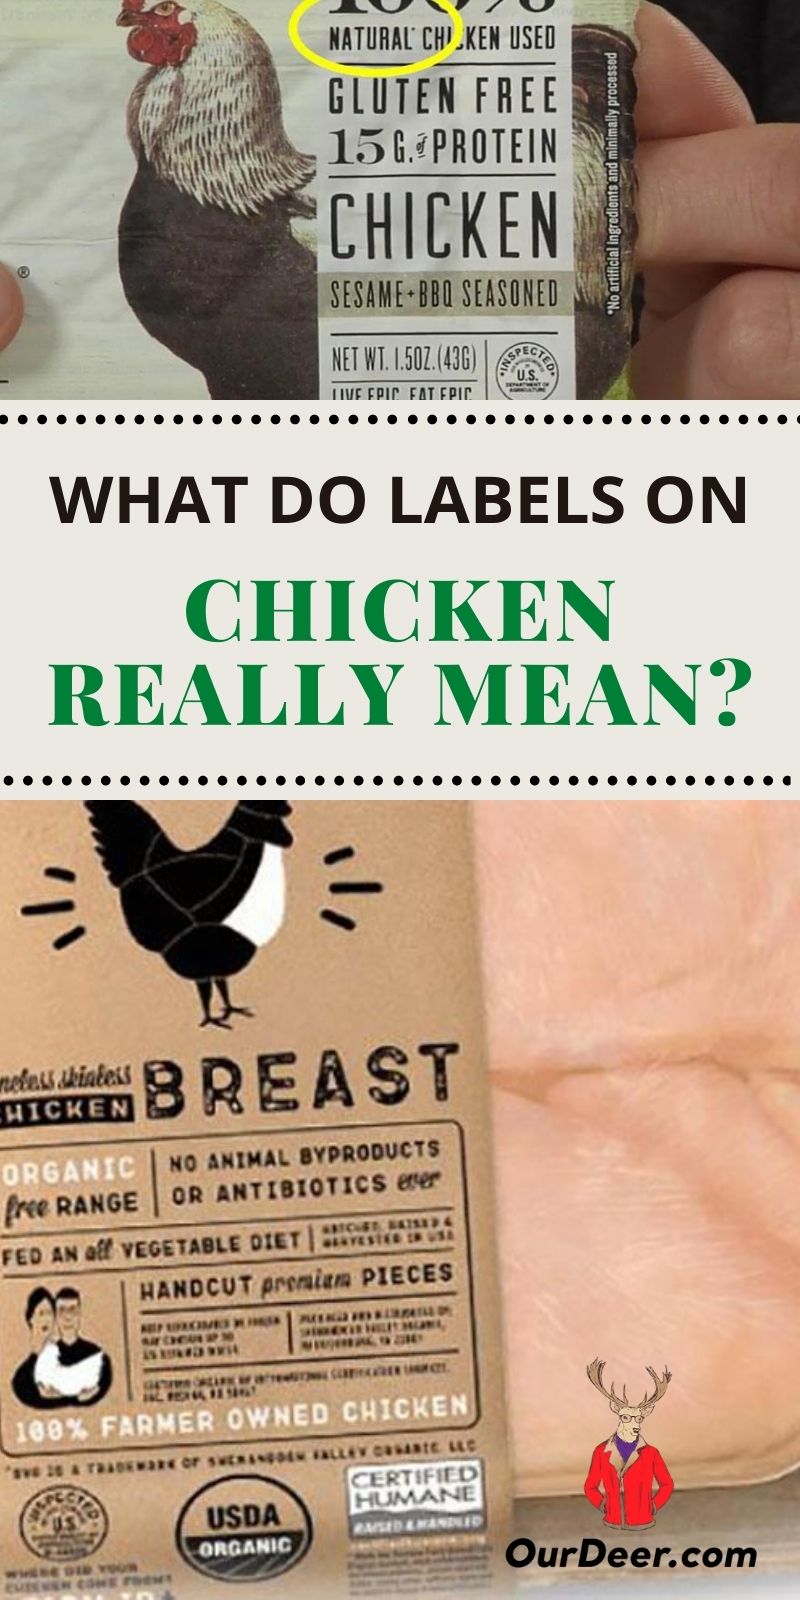 Labels on Chicken Really Mean